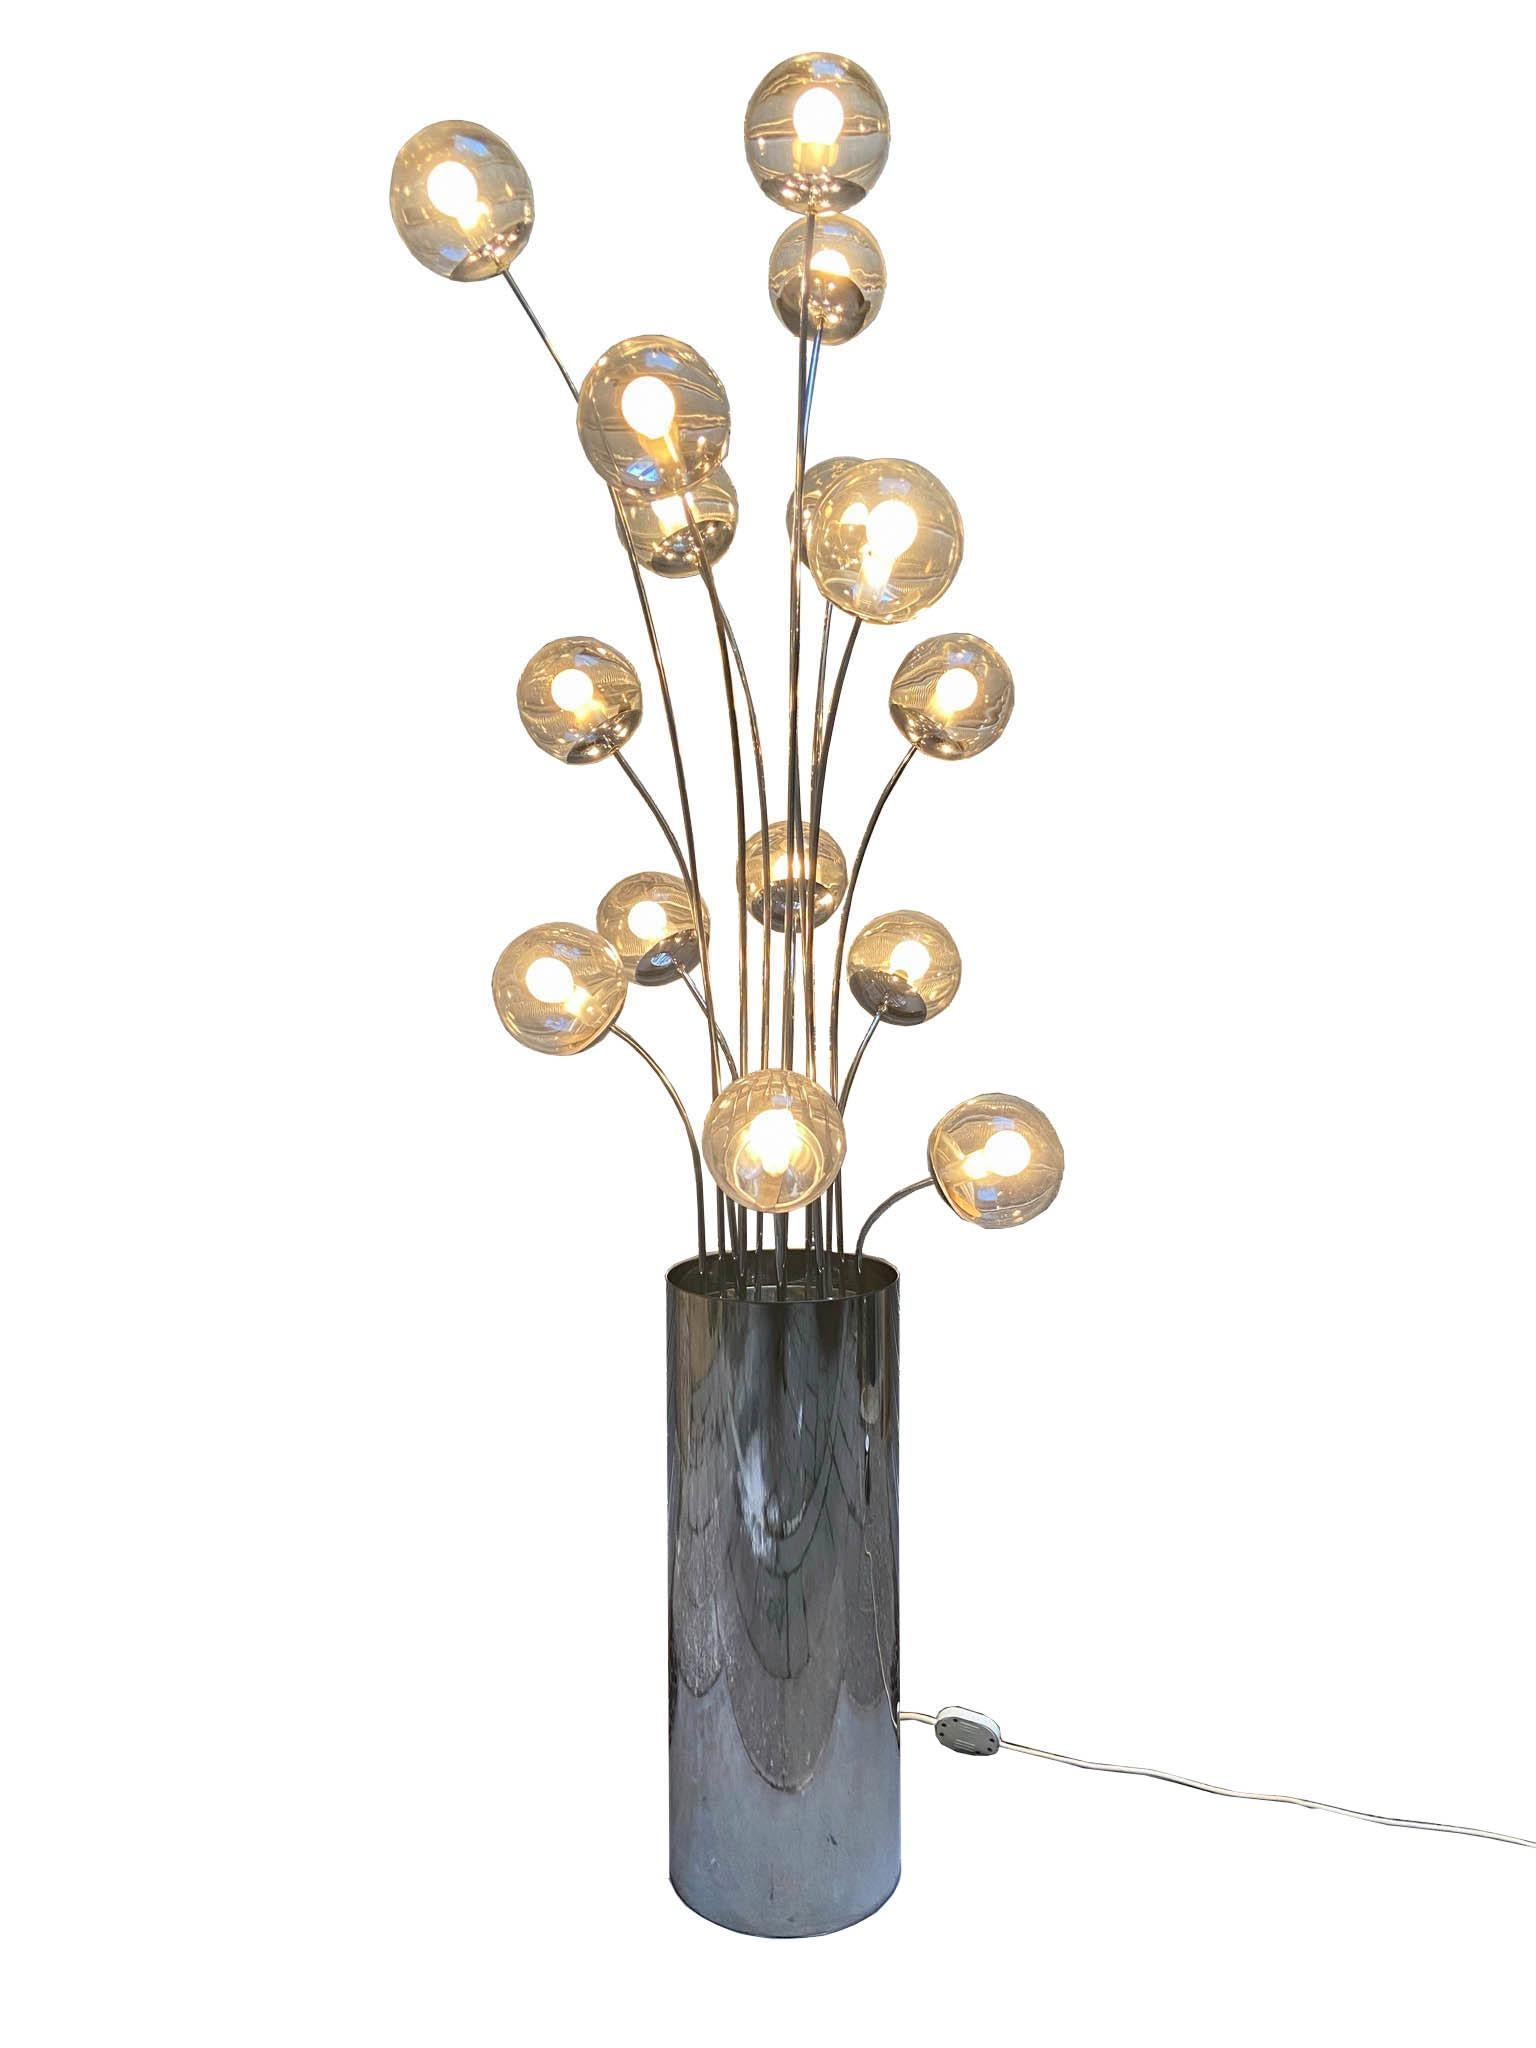 Floor lamp with base in mirror polished stainless steel and stems in polished chromed brass. Sphere diffusers in transparent glass.